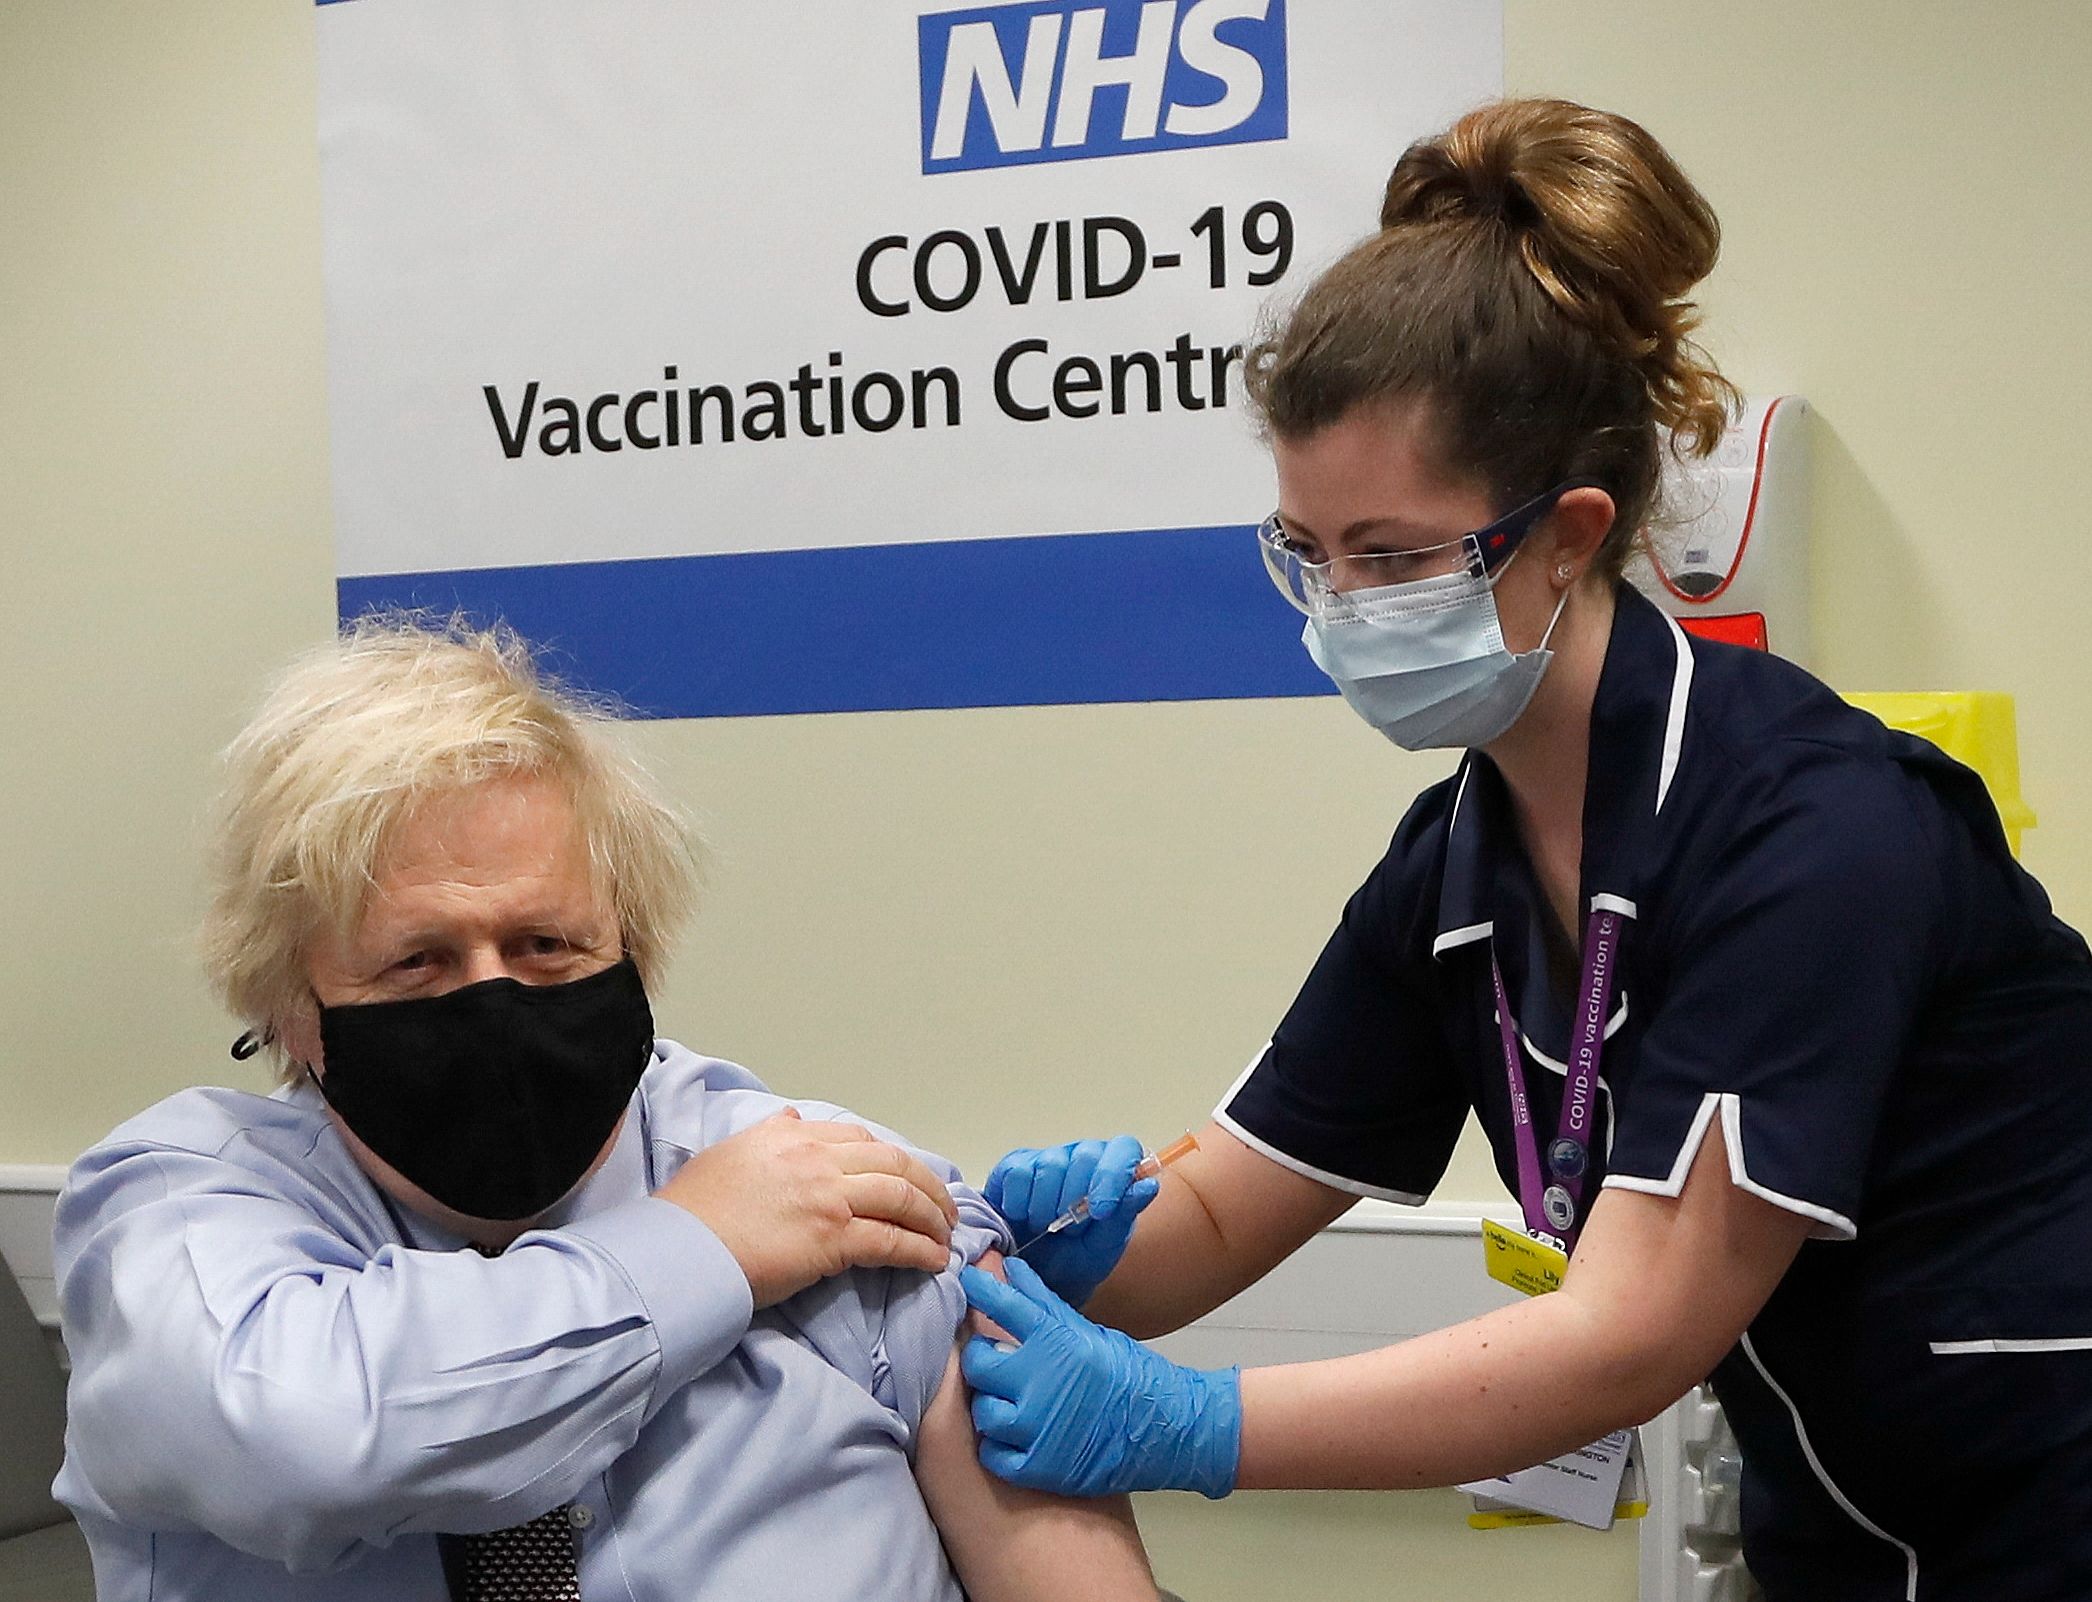 UK caps off ‘bumper week’ with record COVID-19 vaccinations on ‘Super Saturday’